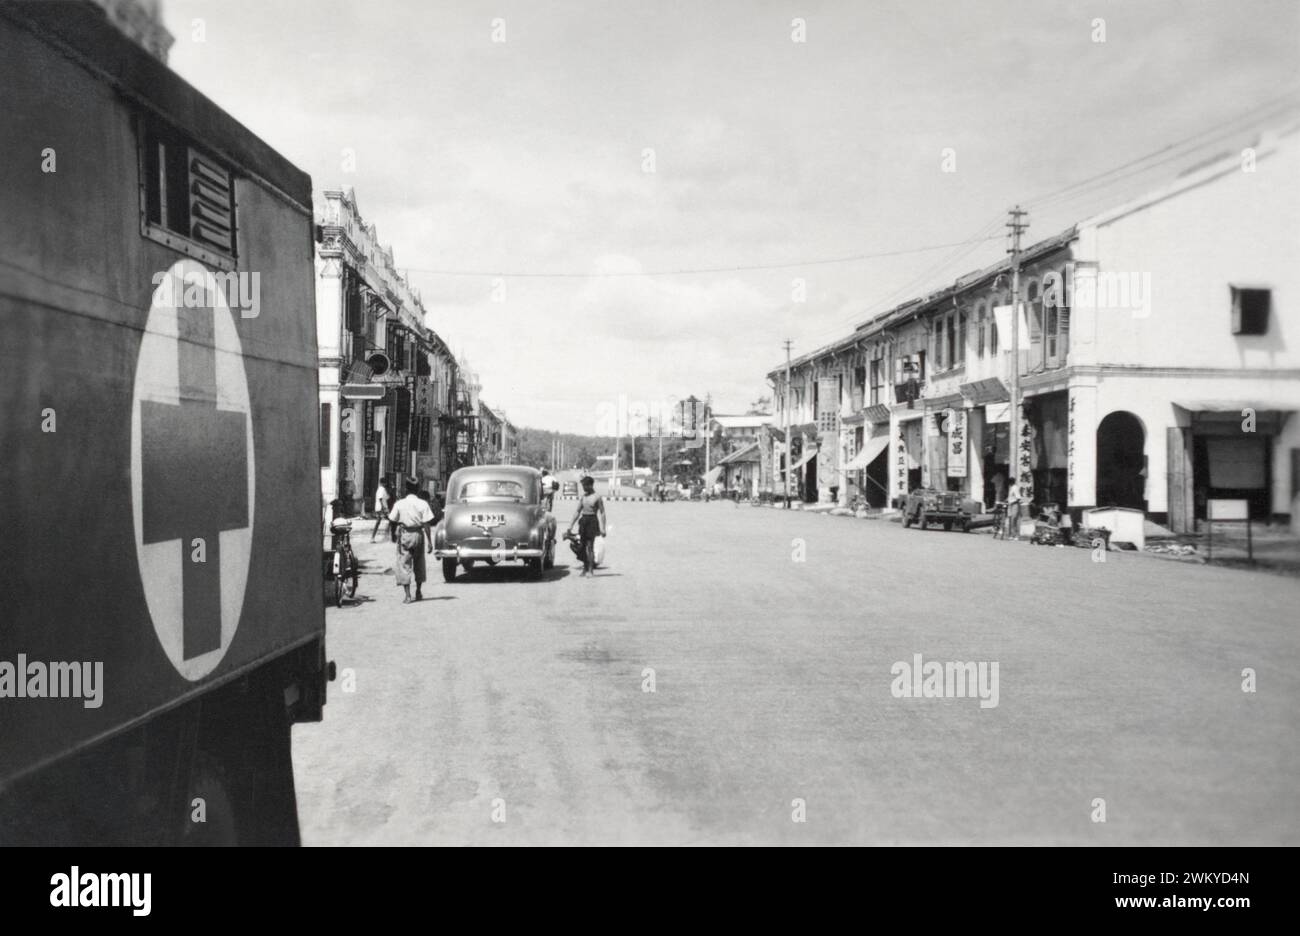 A Royal Army Medical Corps ambulance in a Malayan town during the Malayan Emergancy, 1950. Stock Photo